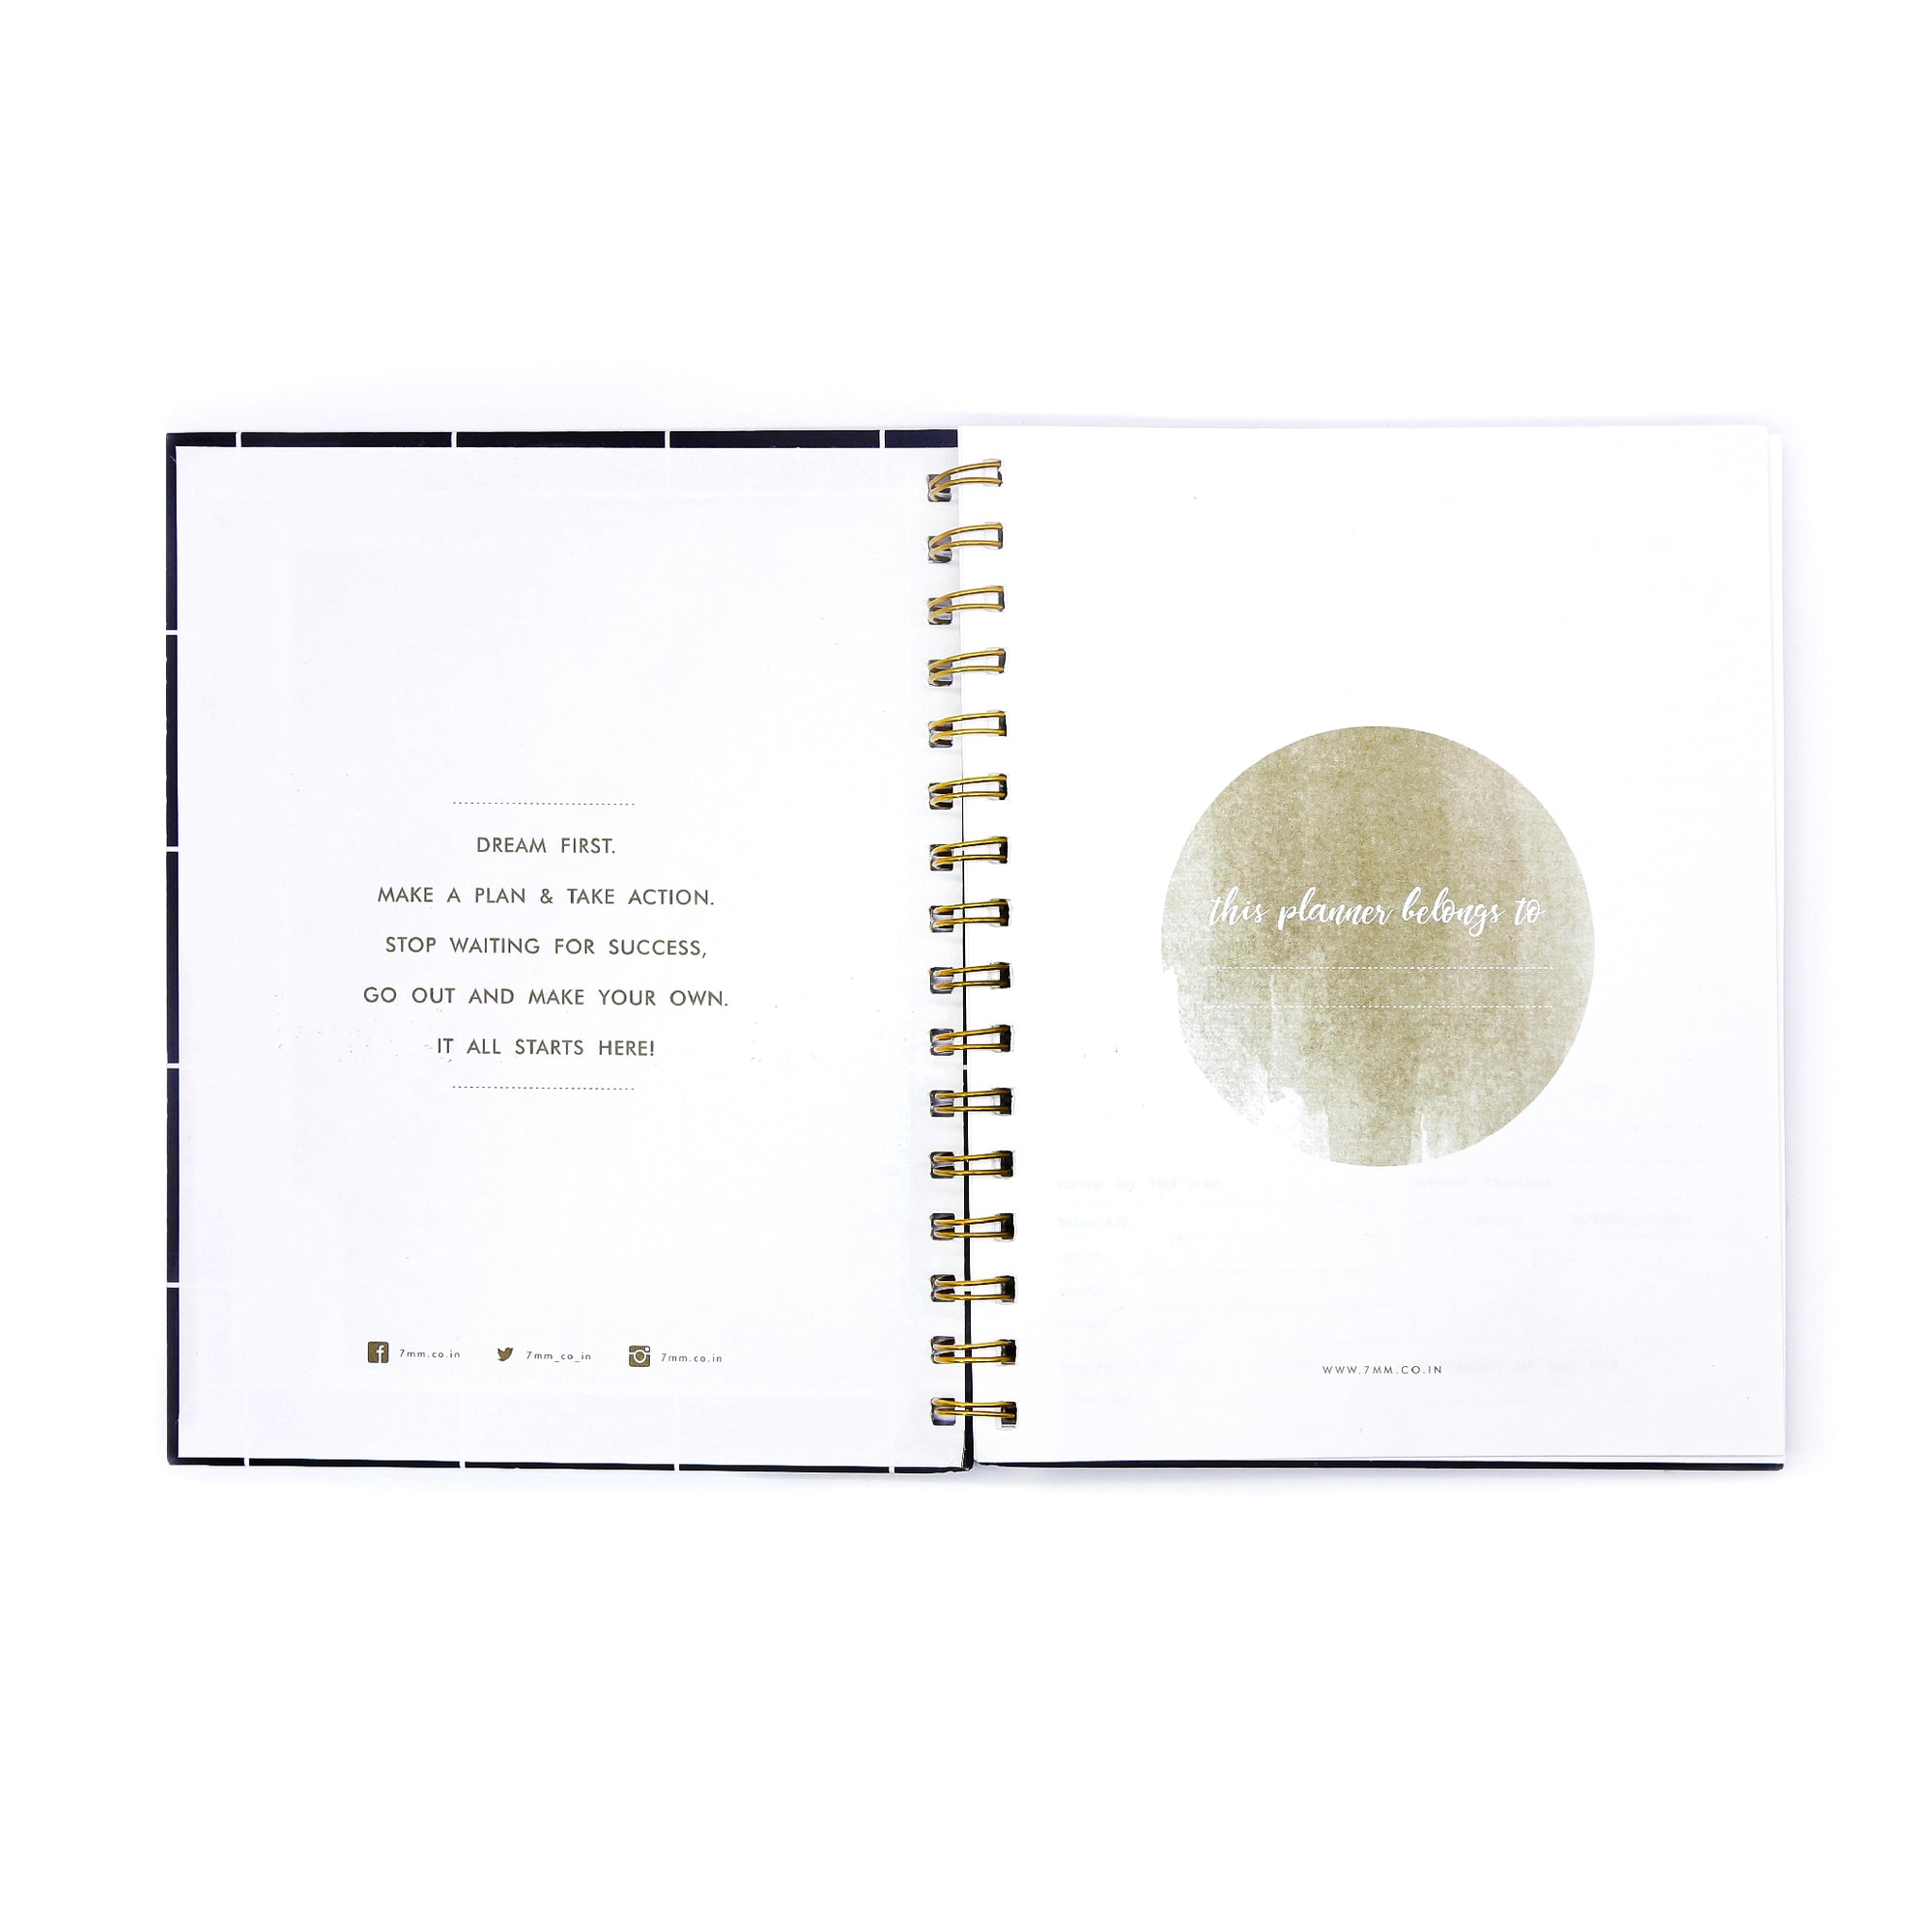 Daily Planner (Square) - 7mm - Fine Paper Stationery